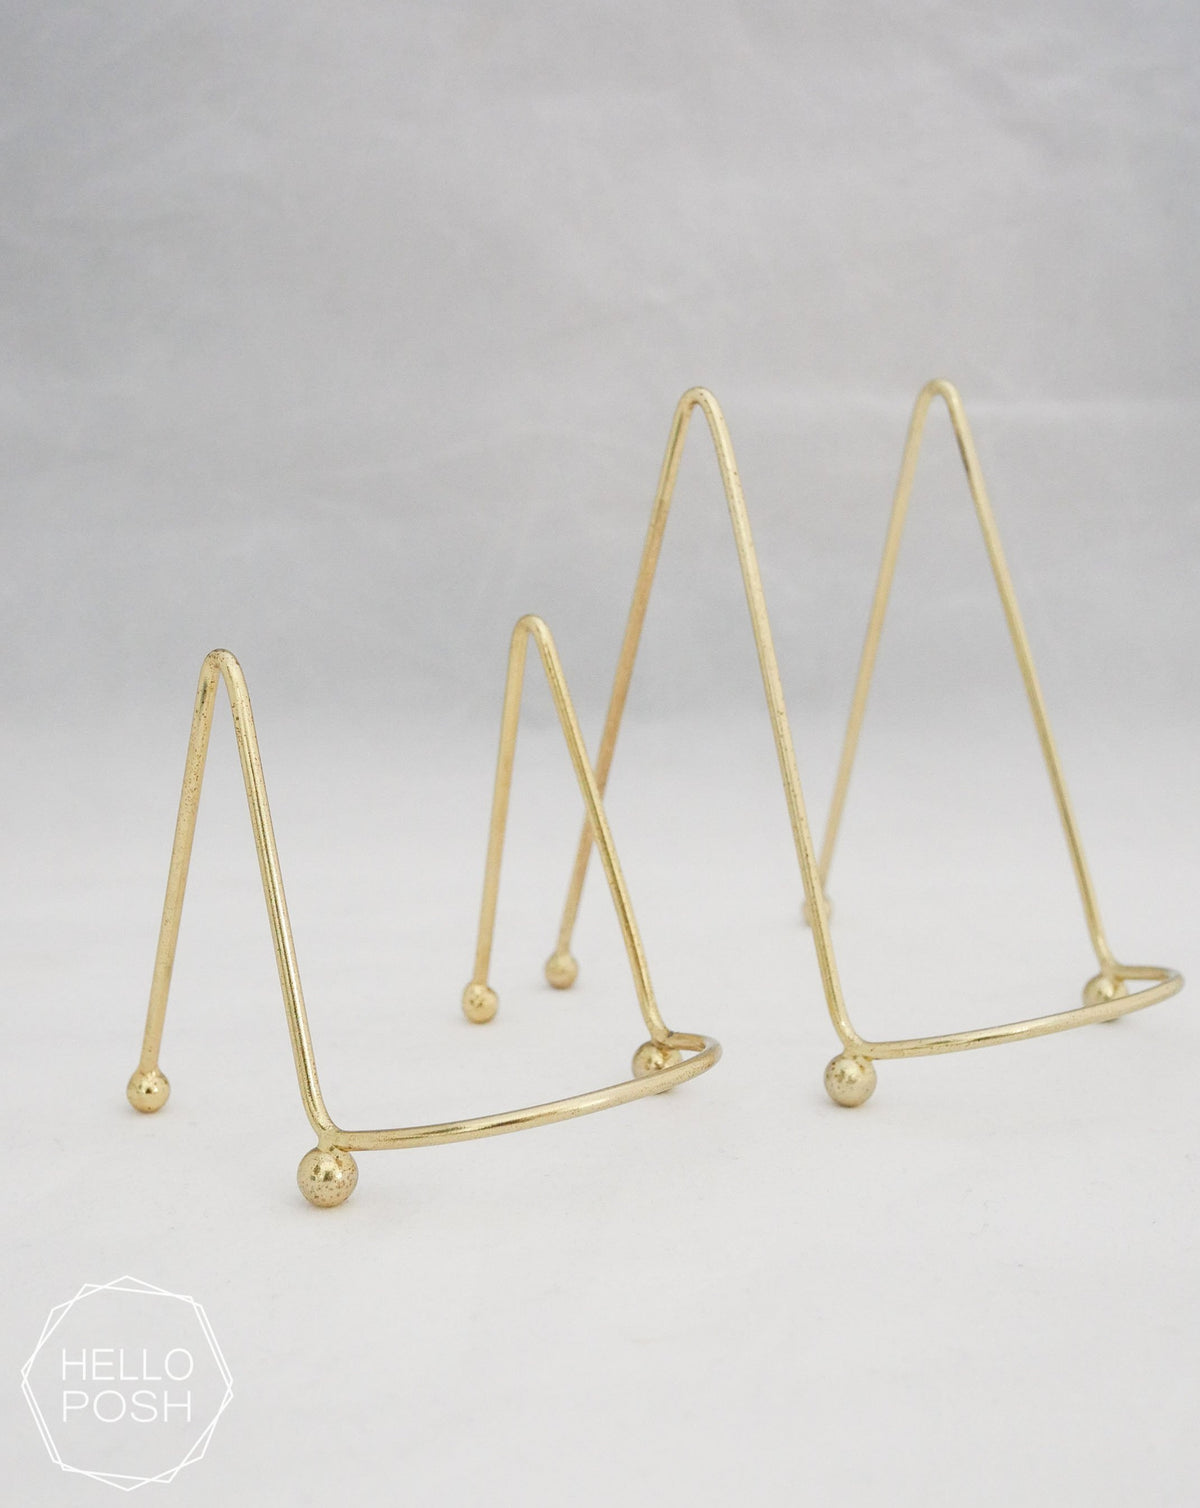 Small gold easels; Brass display stands